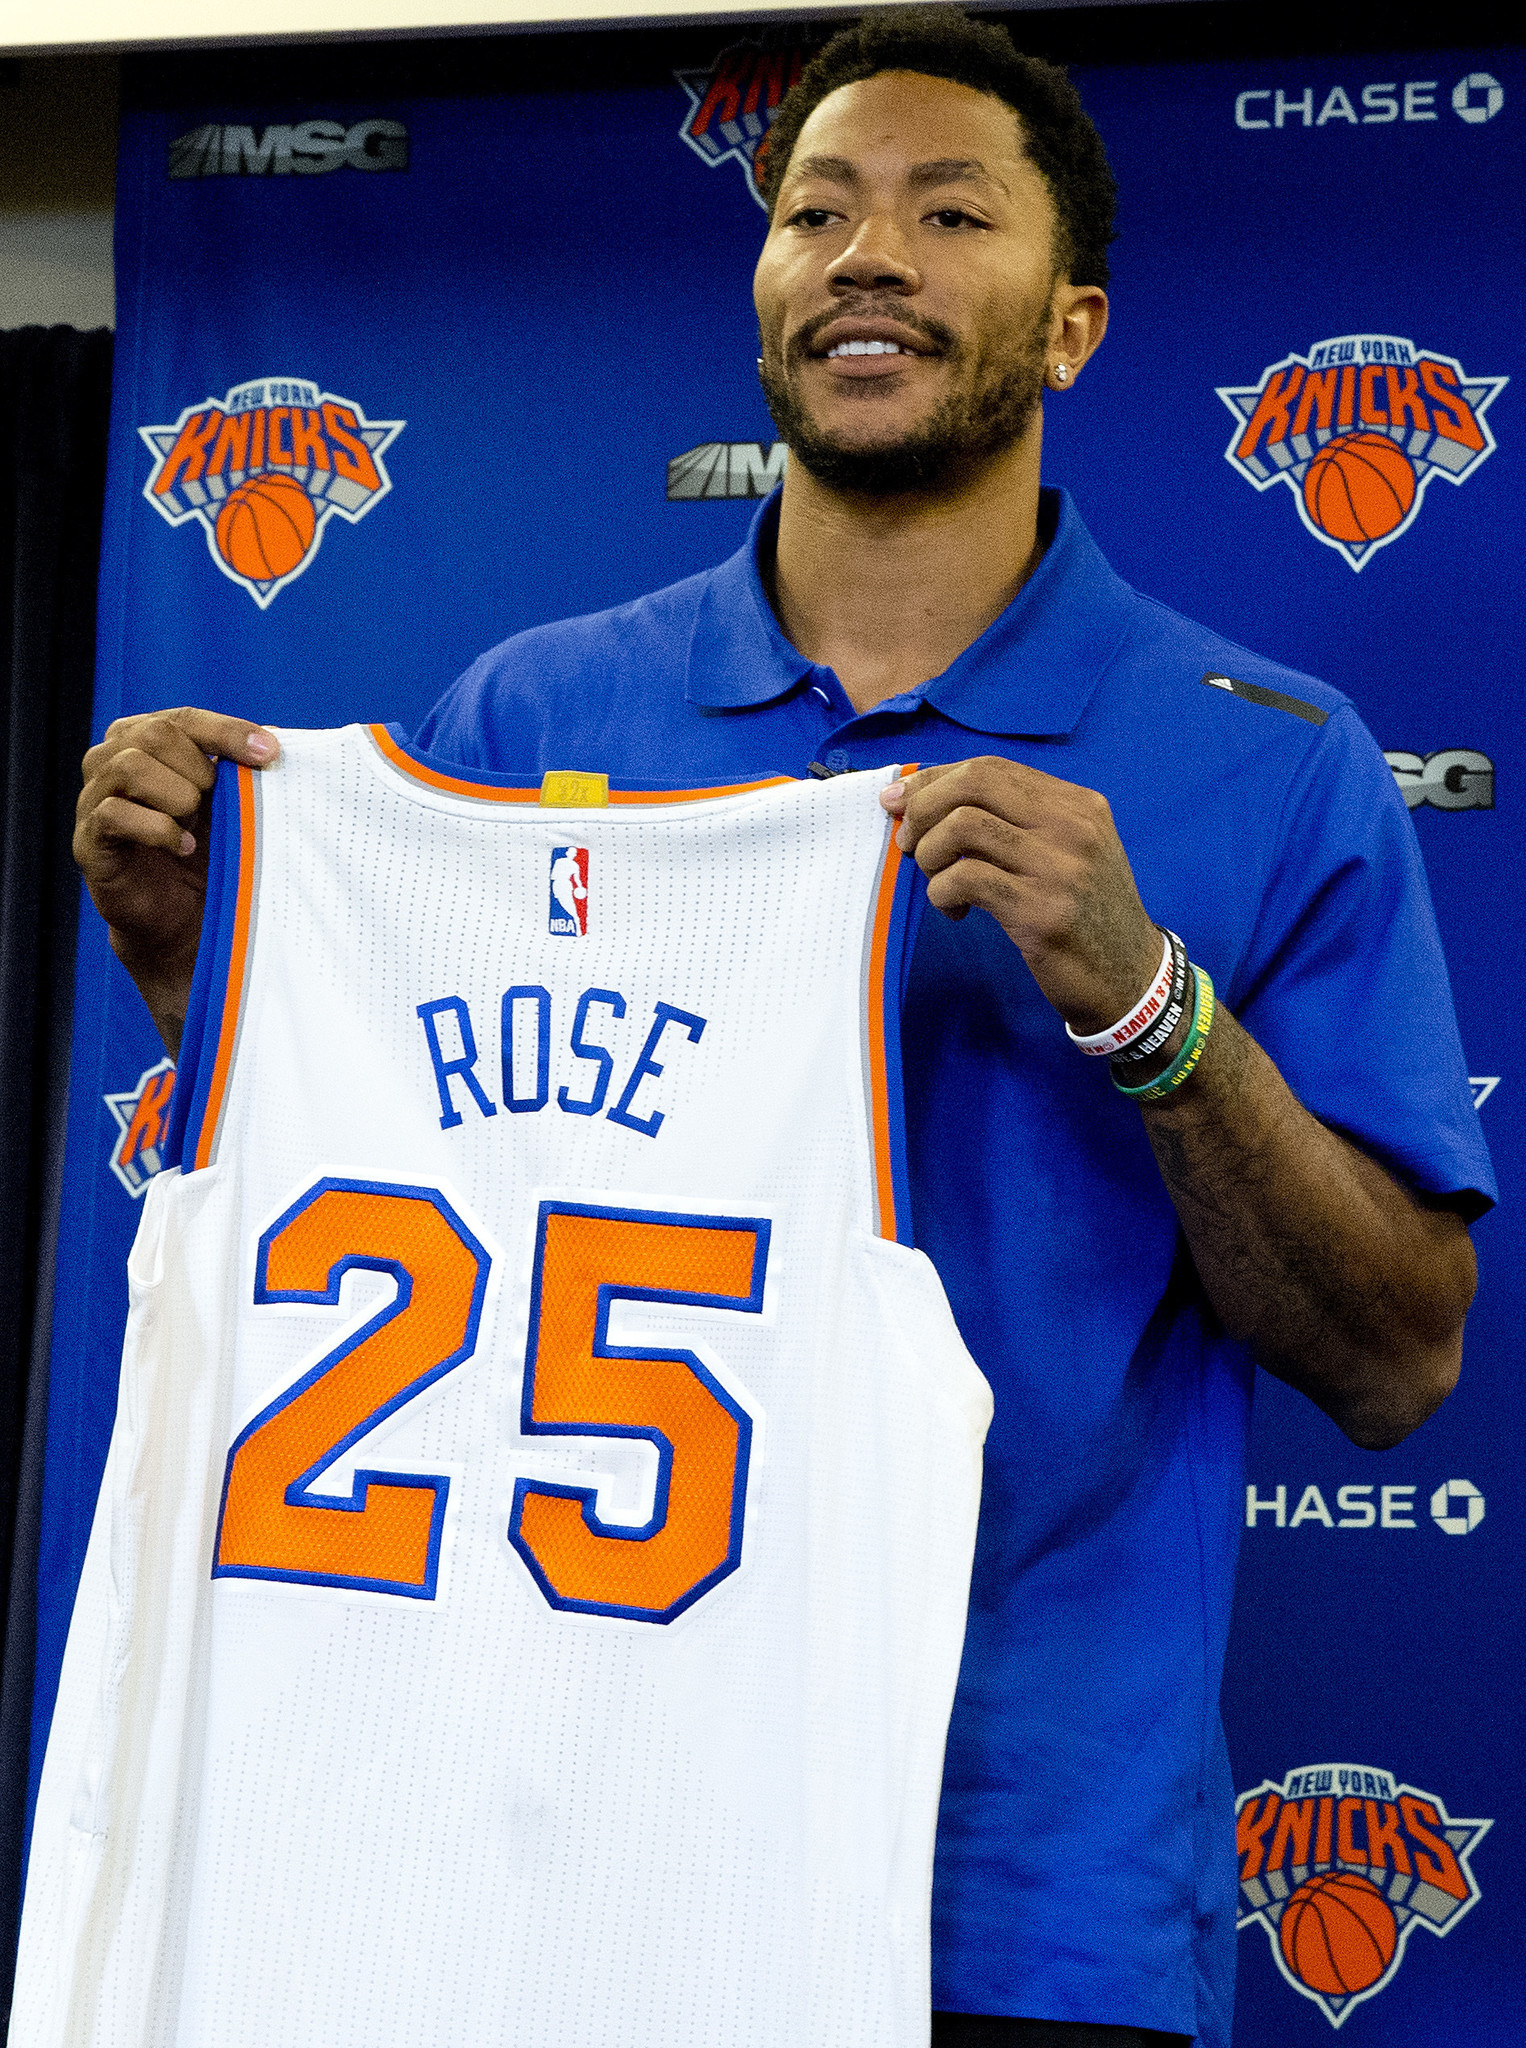 Derrick Rose is excited to be a Knick, even as he looks back at Chicago - Chicago Tribune